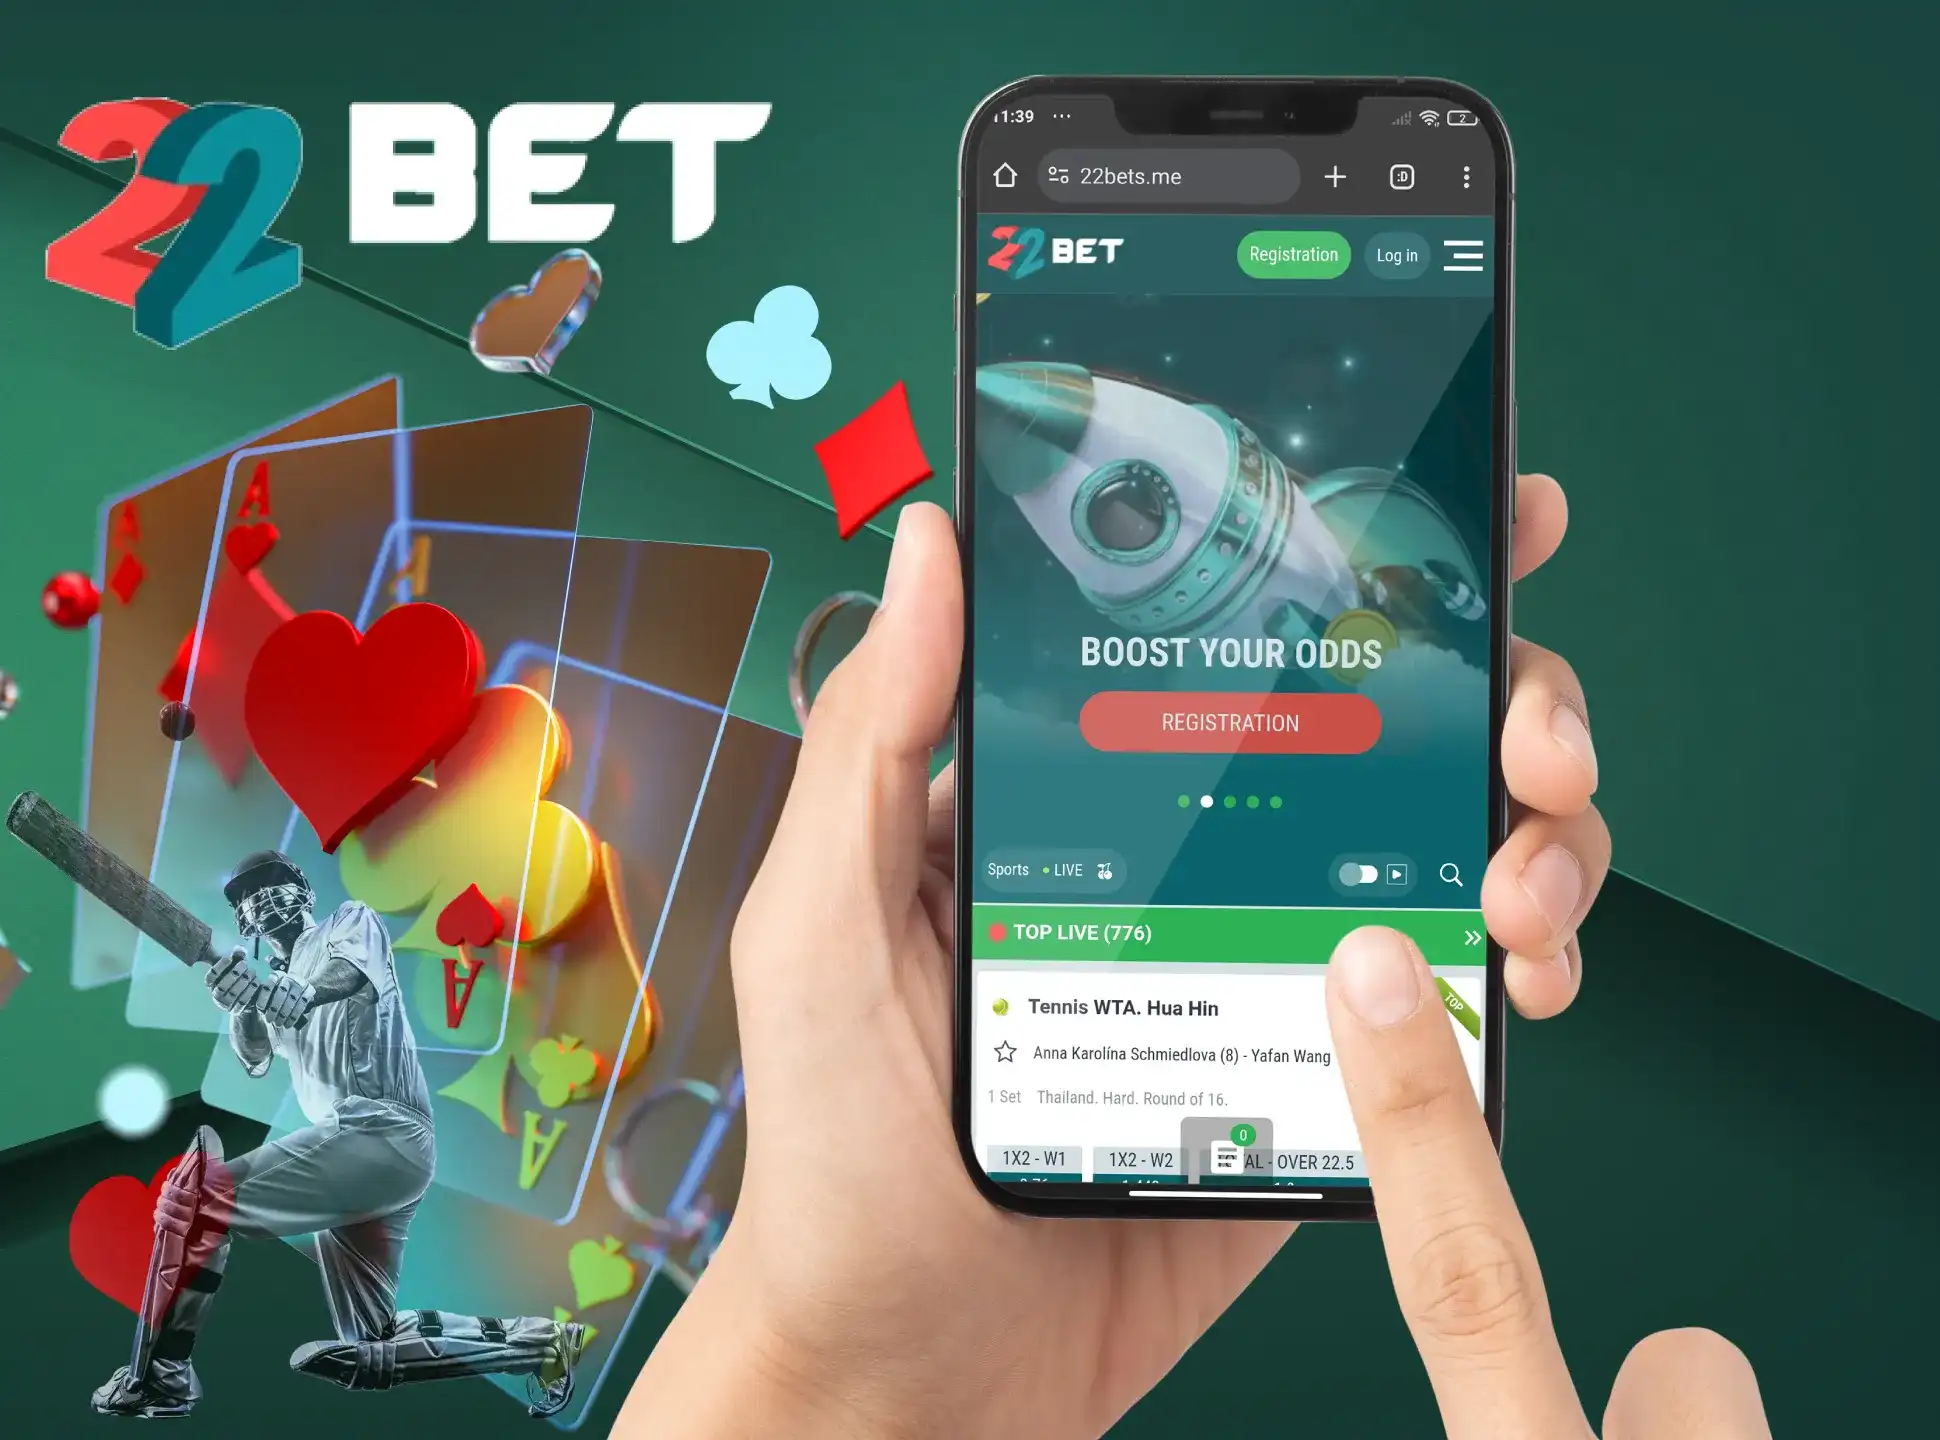 On the official page of the 22Bet website, look for a button to download the mobile app.